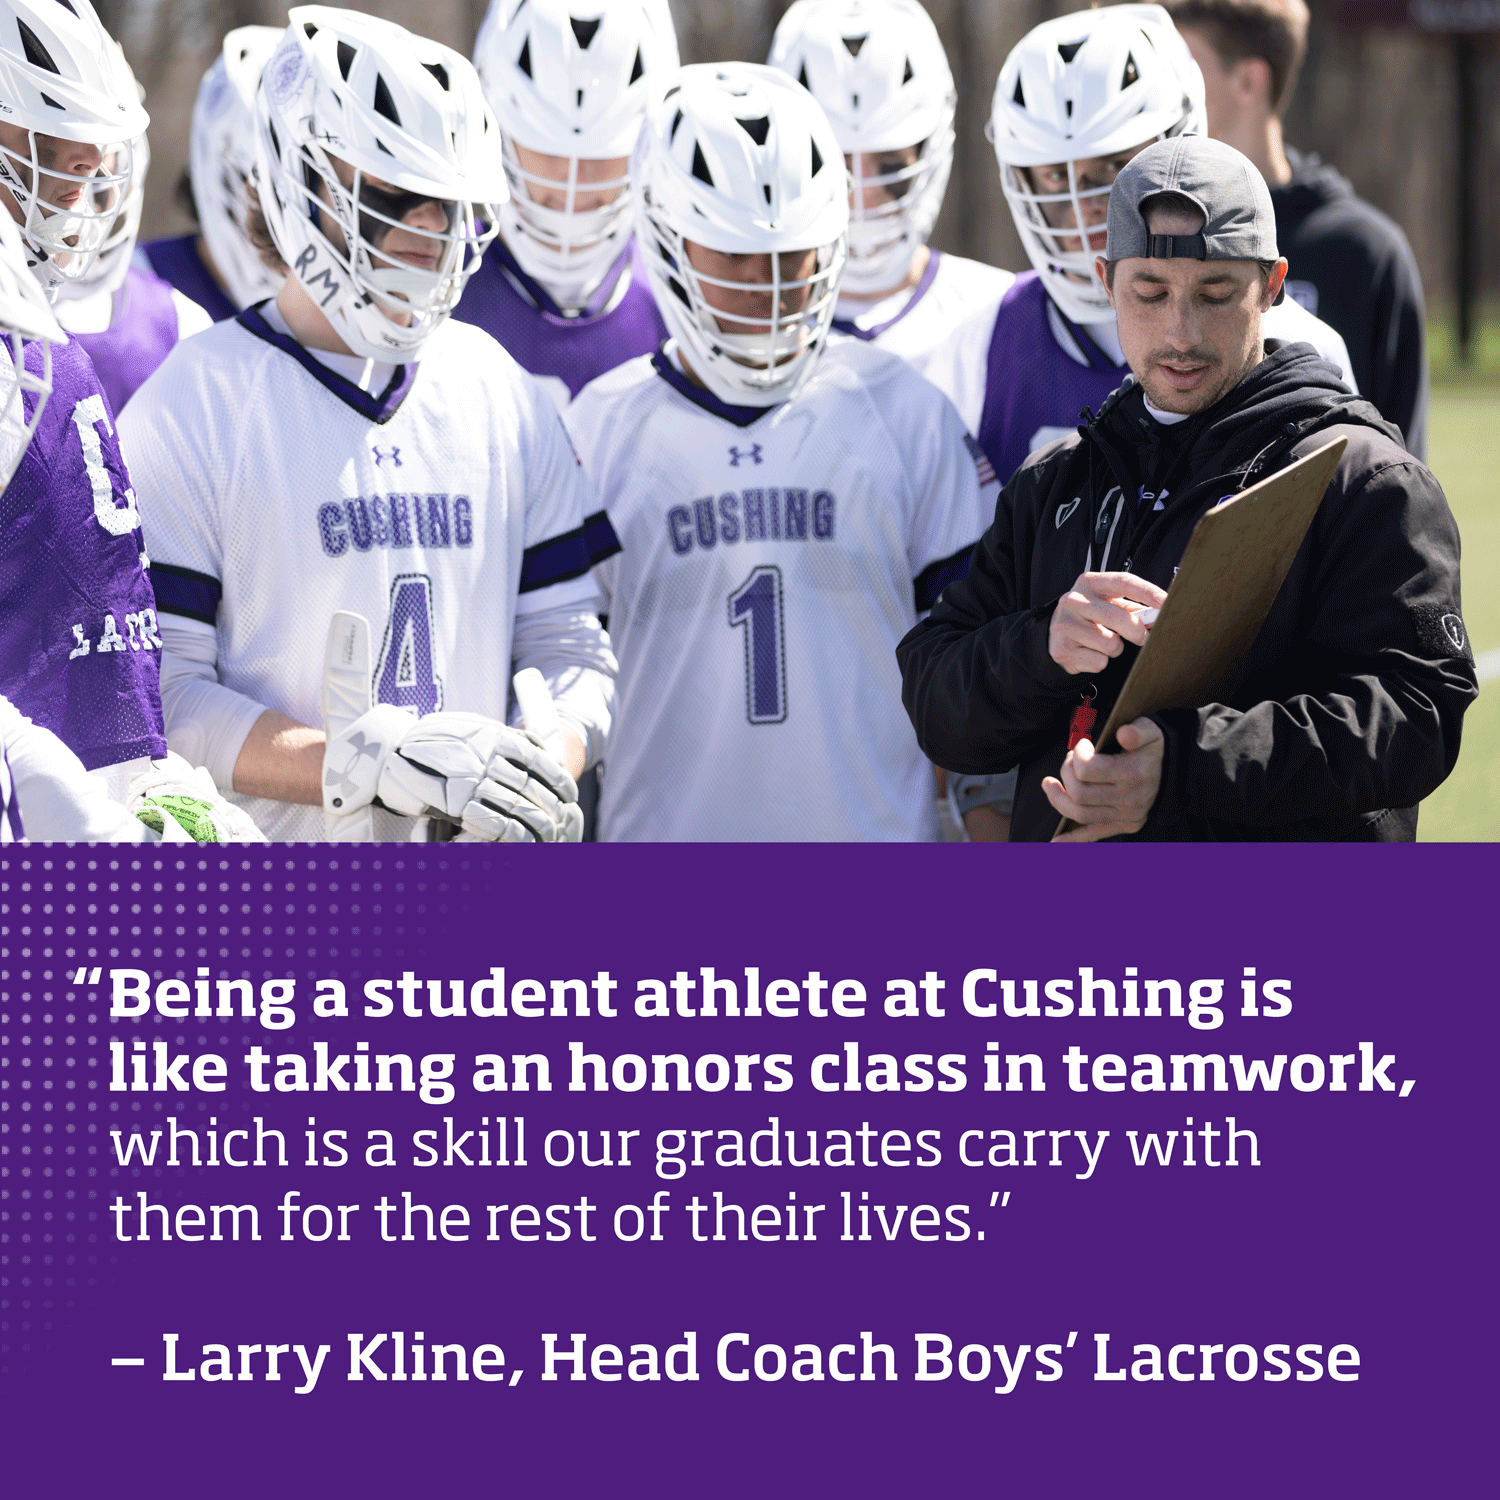 "Being a student athlete at Cushing is like taking an honors class in teamwork, which is a skill our graduates will carry with them for the rest of their lives." Larry Kline, Head Coach Boys' Lacrosse